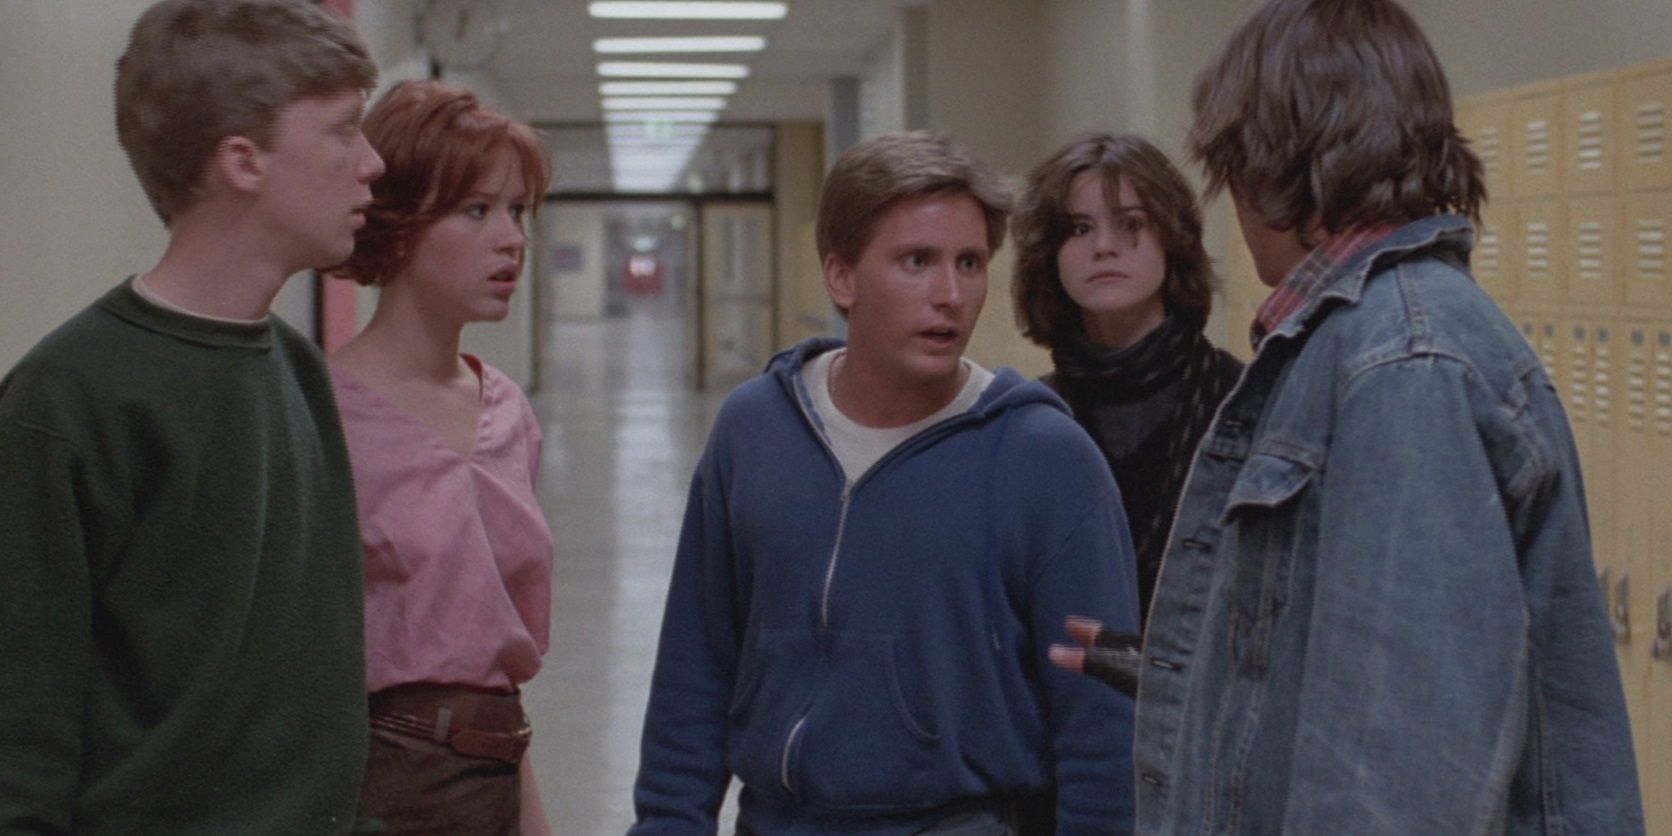 The kids in the hallway in The Breakfast Club